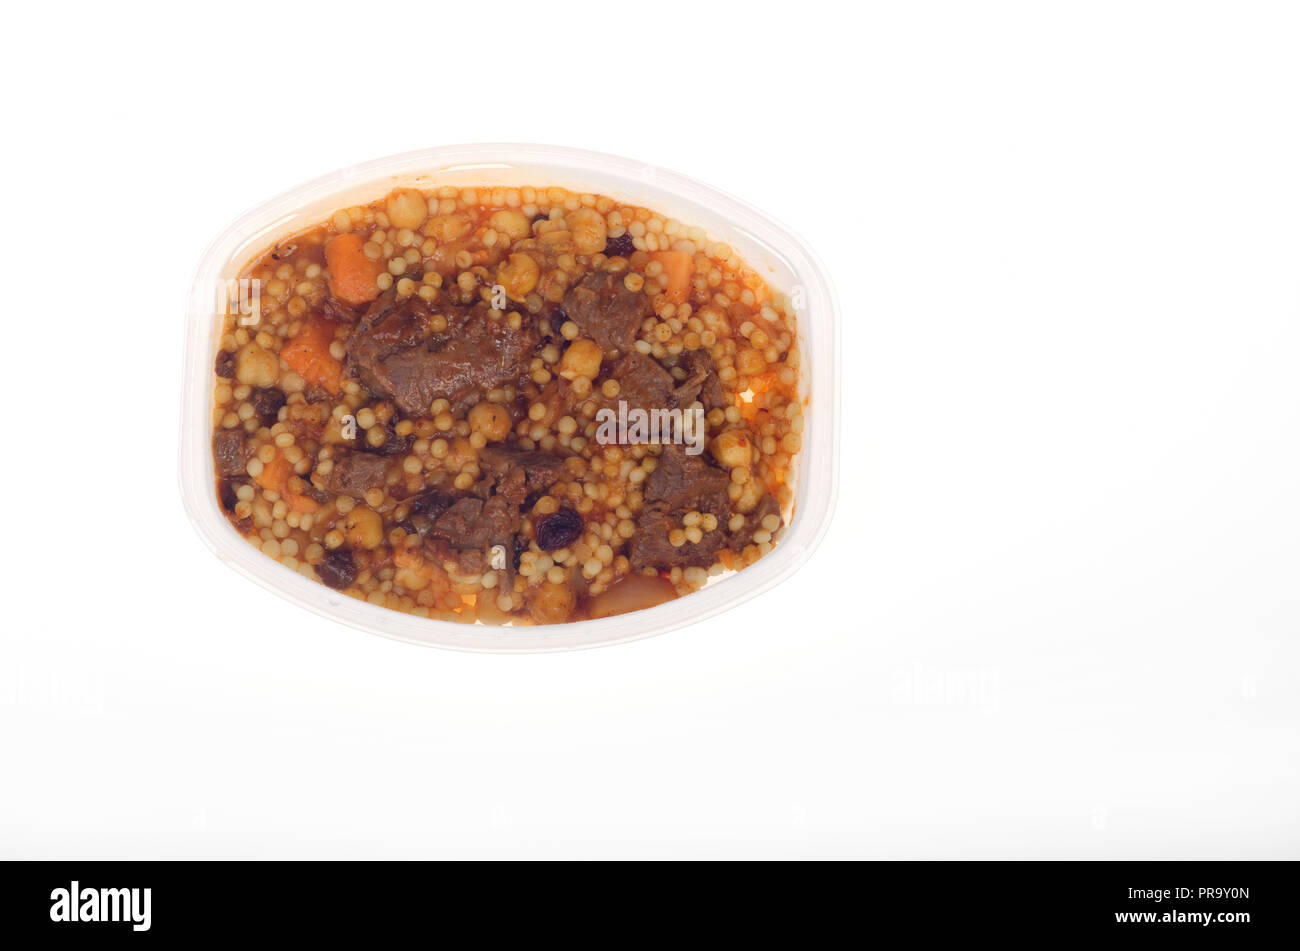 Cooked Lean Cuisine freezer meal of Spiced Morroccan Beef with couscous Stock Photo